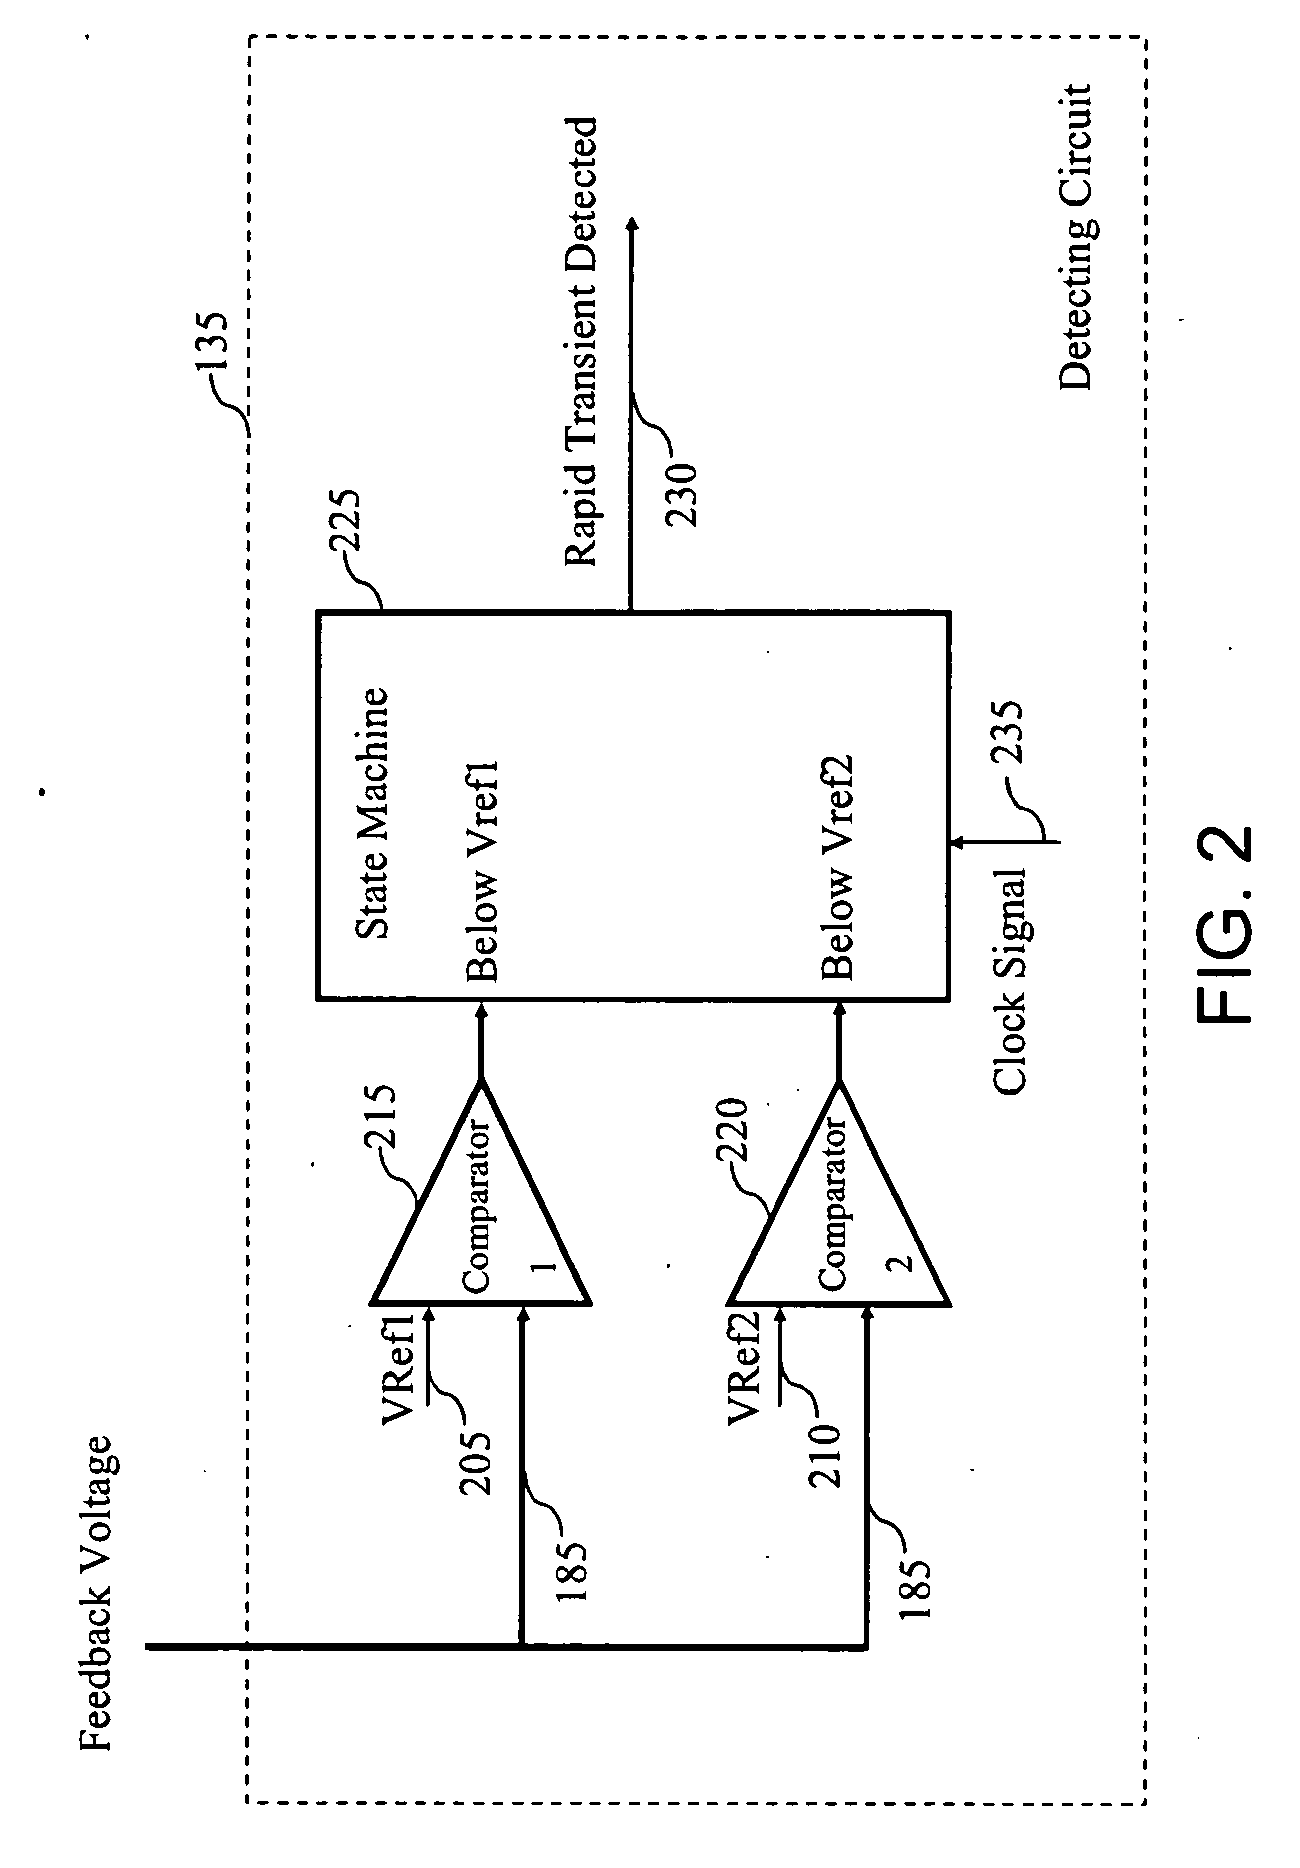 Transient recovery circuit for switching devices